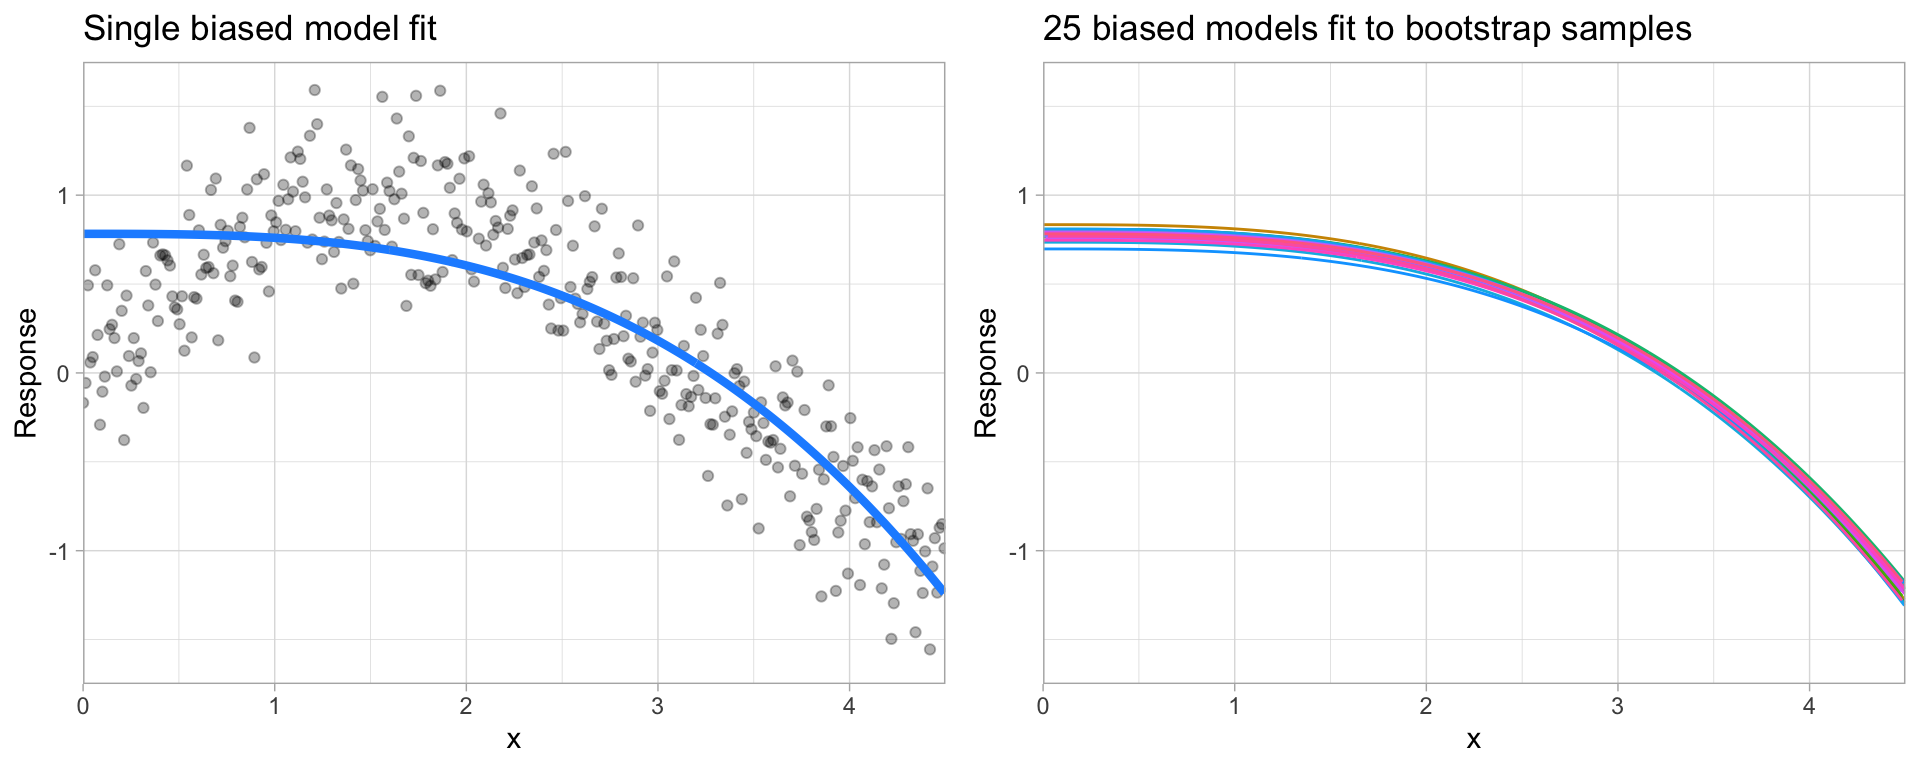 A biased polynomial model fit to a single data set does not capture the underlying non-linear, non-monotonic data structure (left).  Models fit to 25 bootstrapped replicates of the data are underterred by the noise and generates similar, yet still biased, predictions (right).